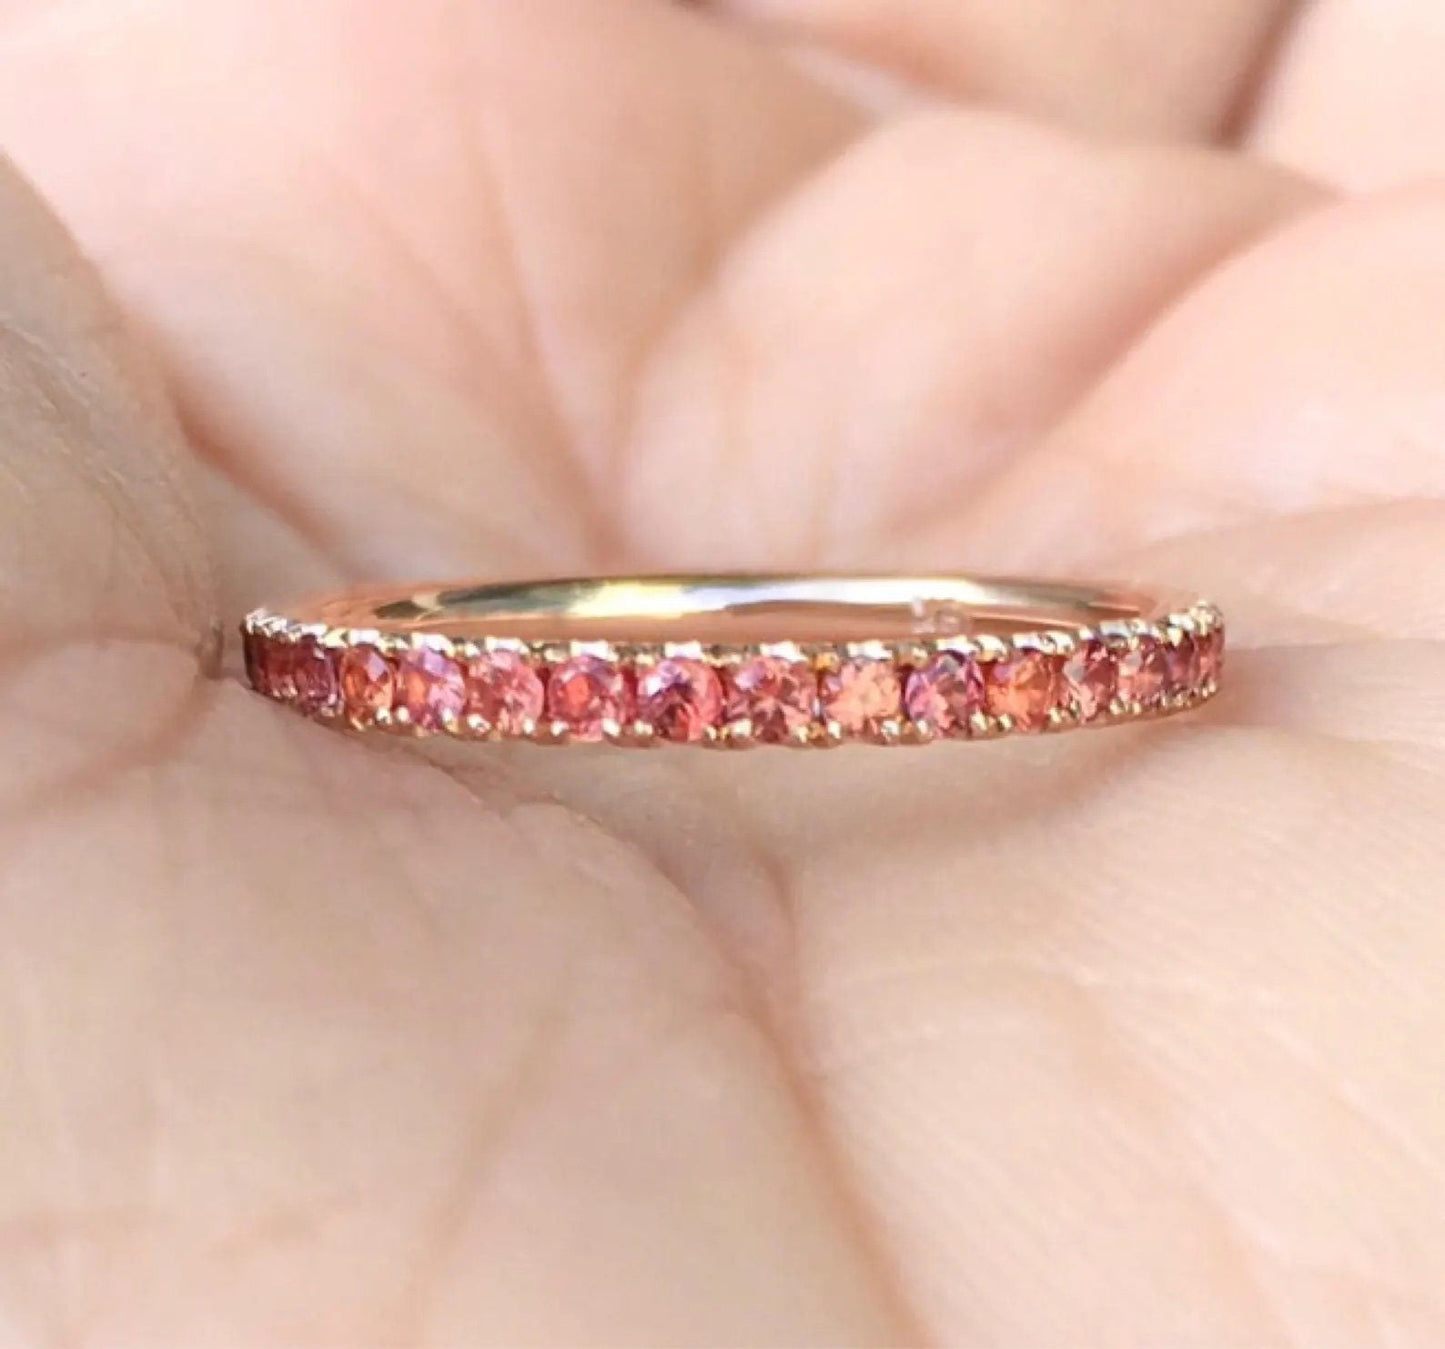 Reserved for Ami/ Set of TWO BANDS - One with Padparadsha Orange Sapphires, One with Aquamaraines